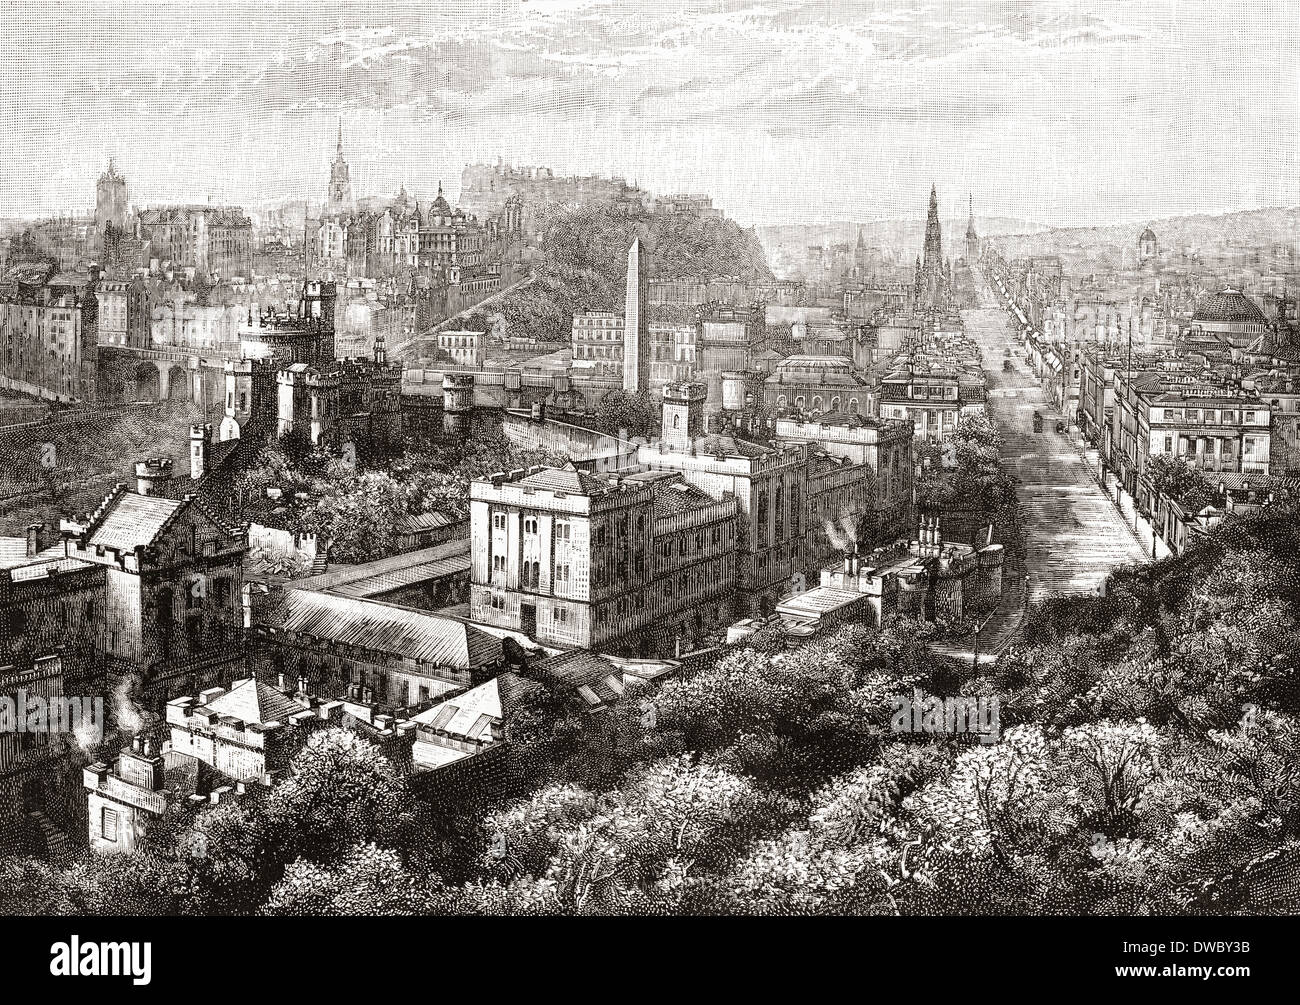 View of Edinburgh, Scotland from the Calton Hill in the 19th century. Stock Photo